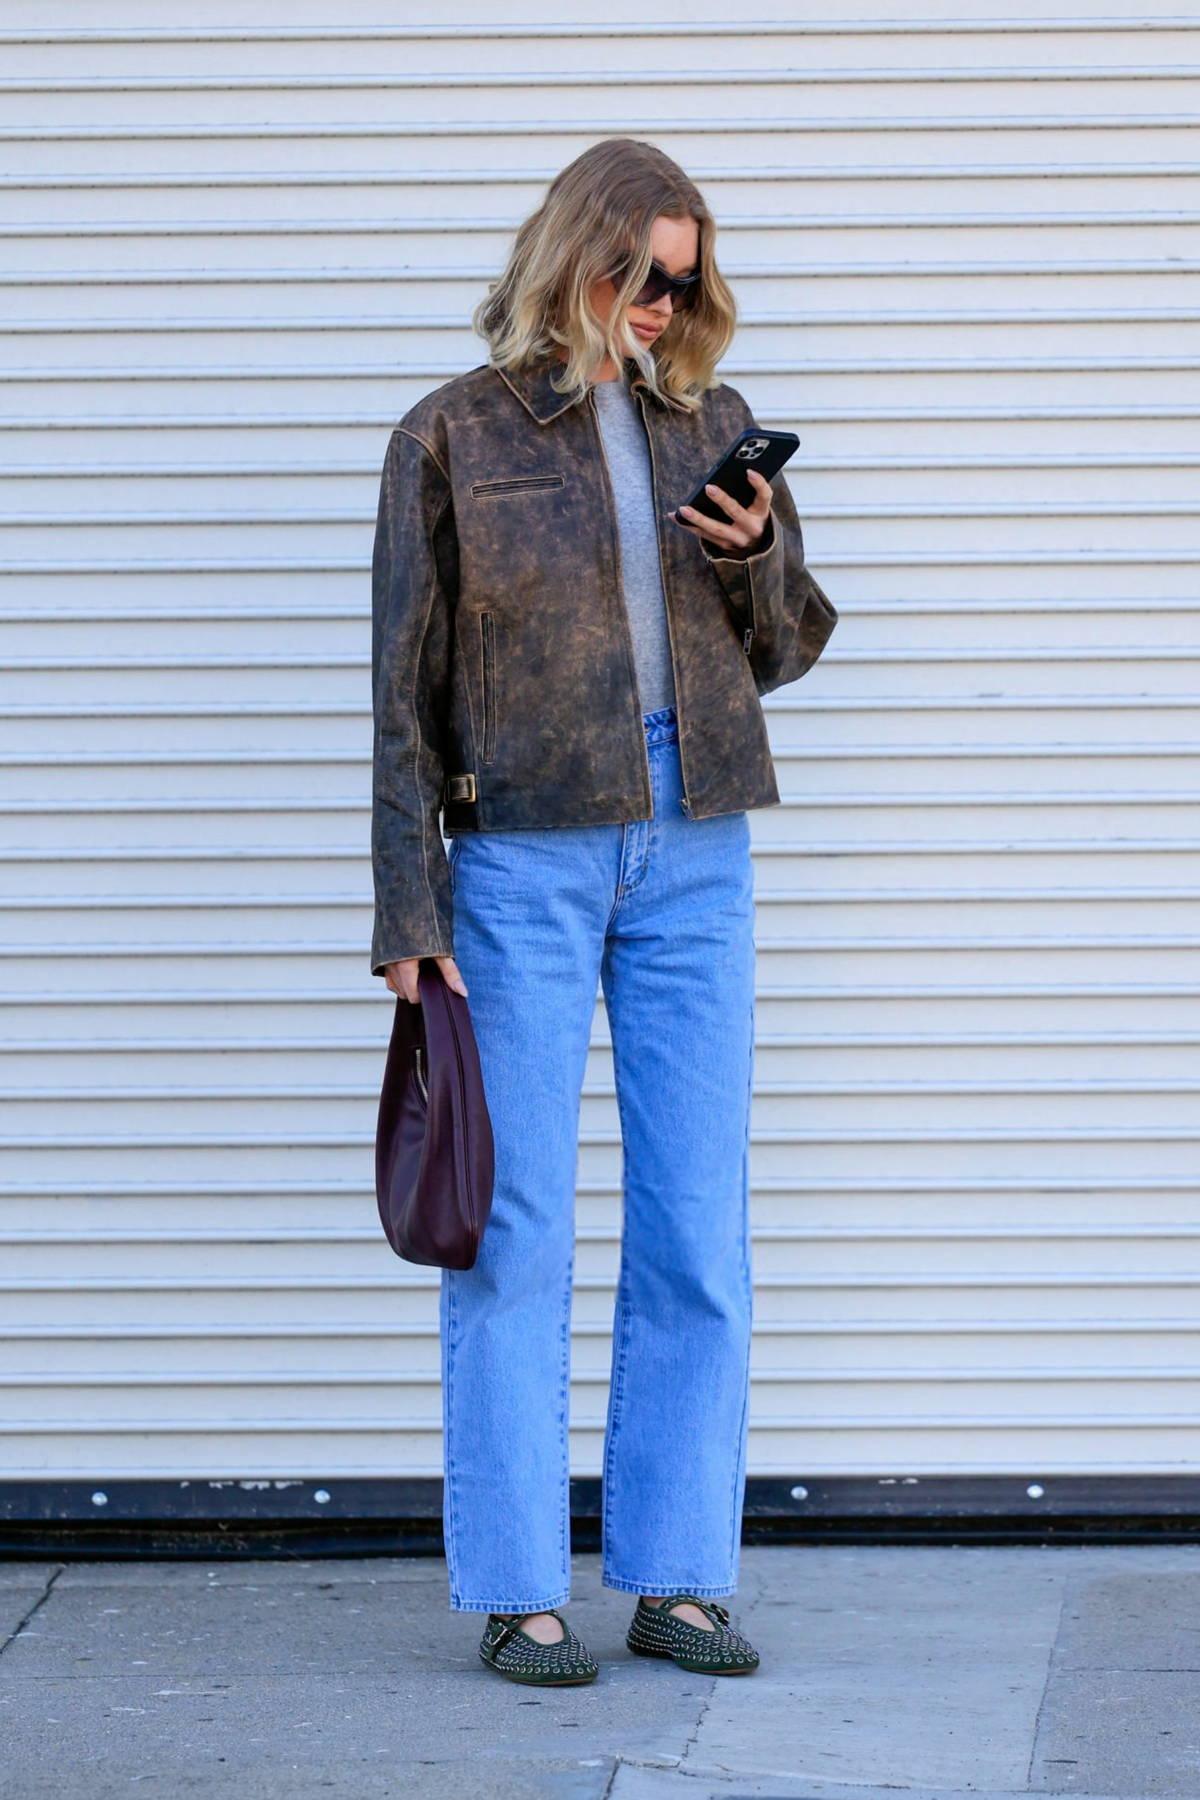 Elsa Hosk's Balenciaga Jacket and Patent Leather Pants Look for Less - The  Budget Babe